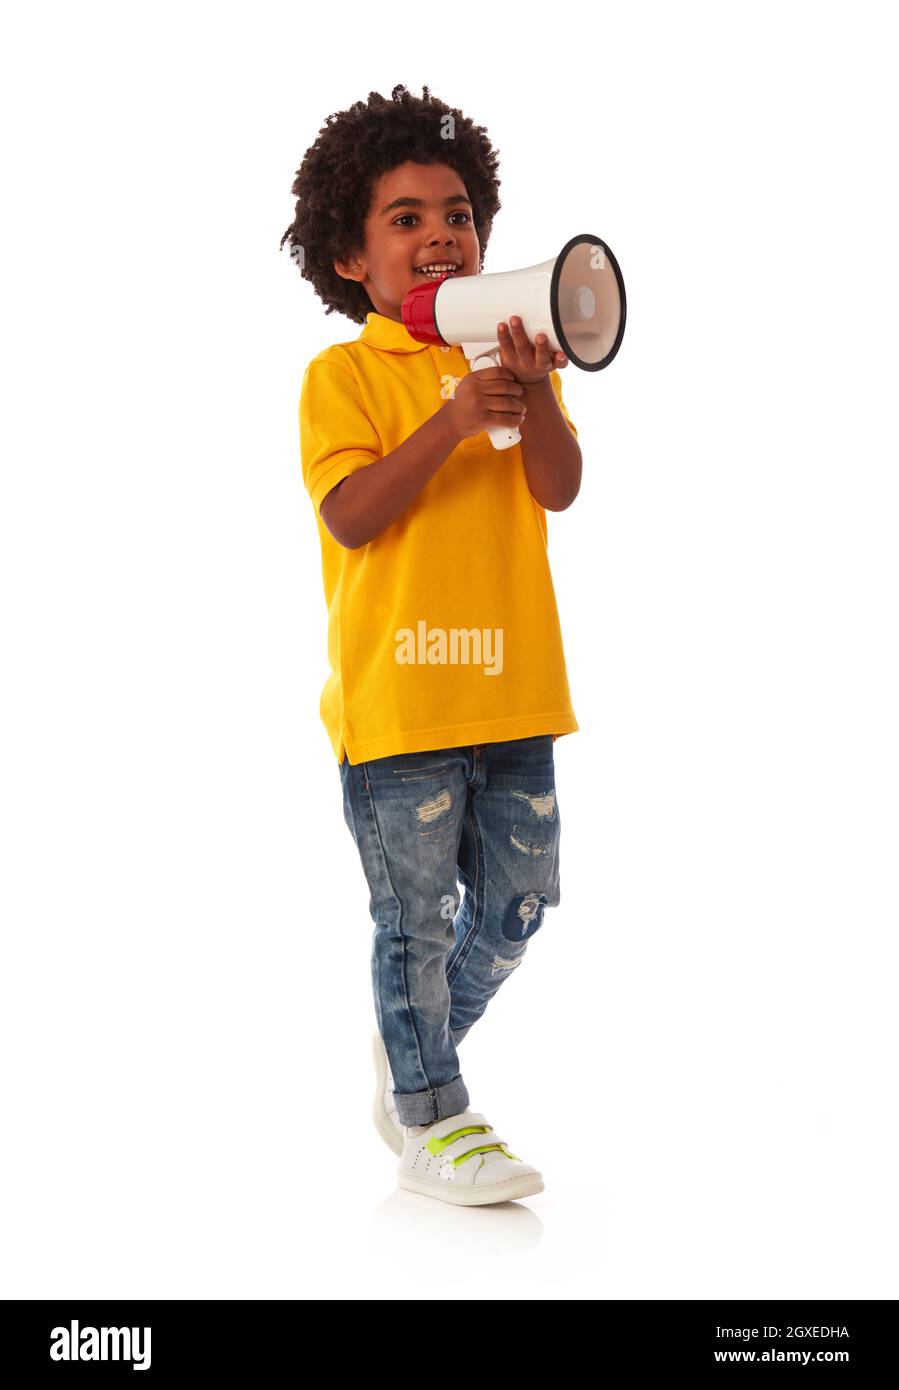 Afican-american kid with megaphone on white background Stock Photo